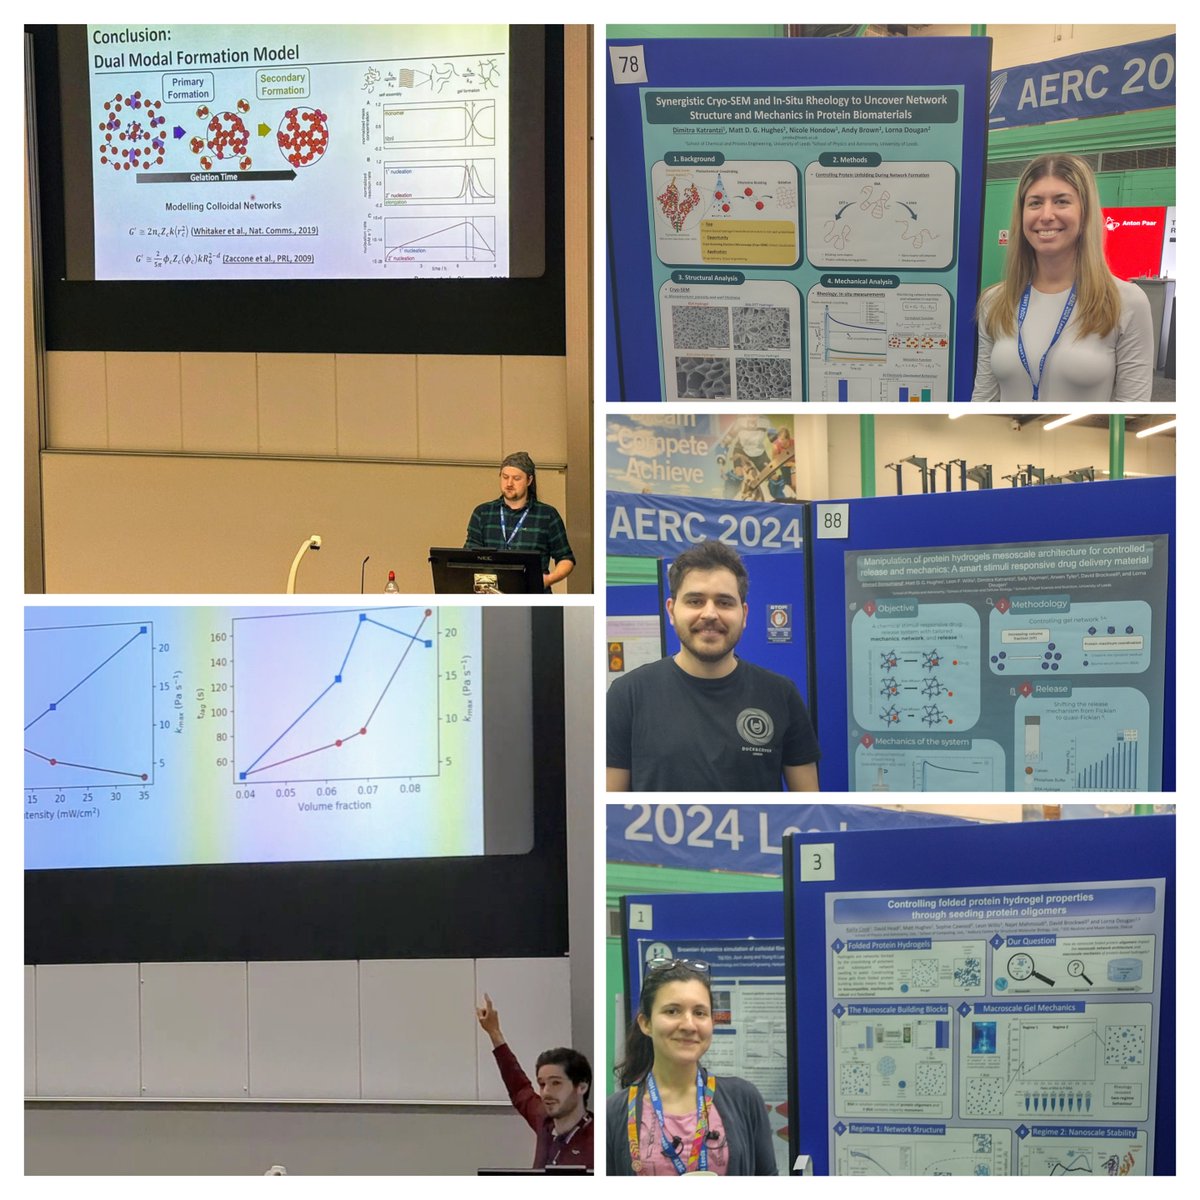 We had a great time at the Annual European Rheology Conference in Leeds. Fantastic science and discussions. Super proud of everyone in the group who presented their research.